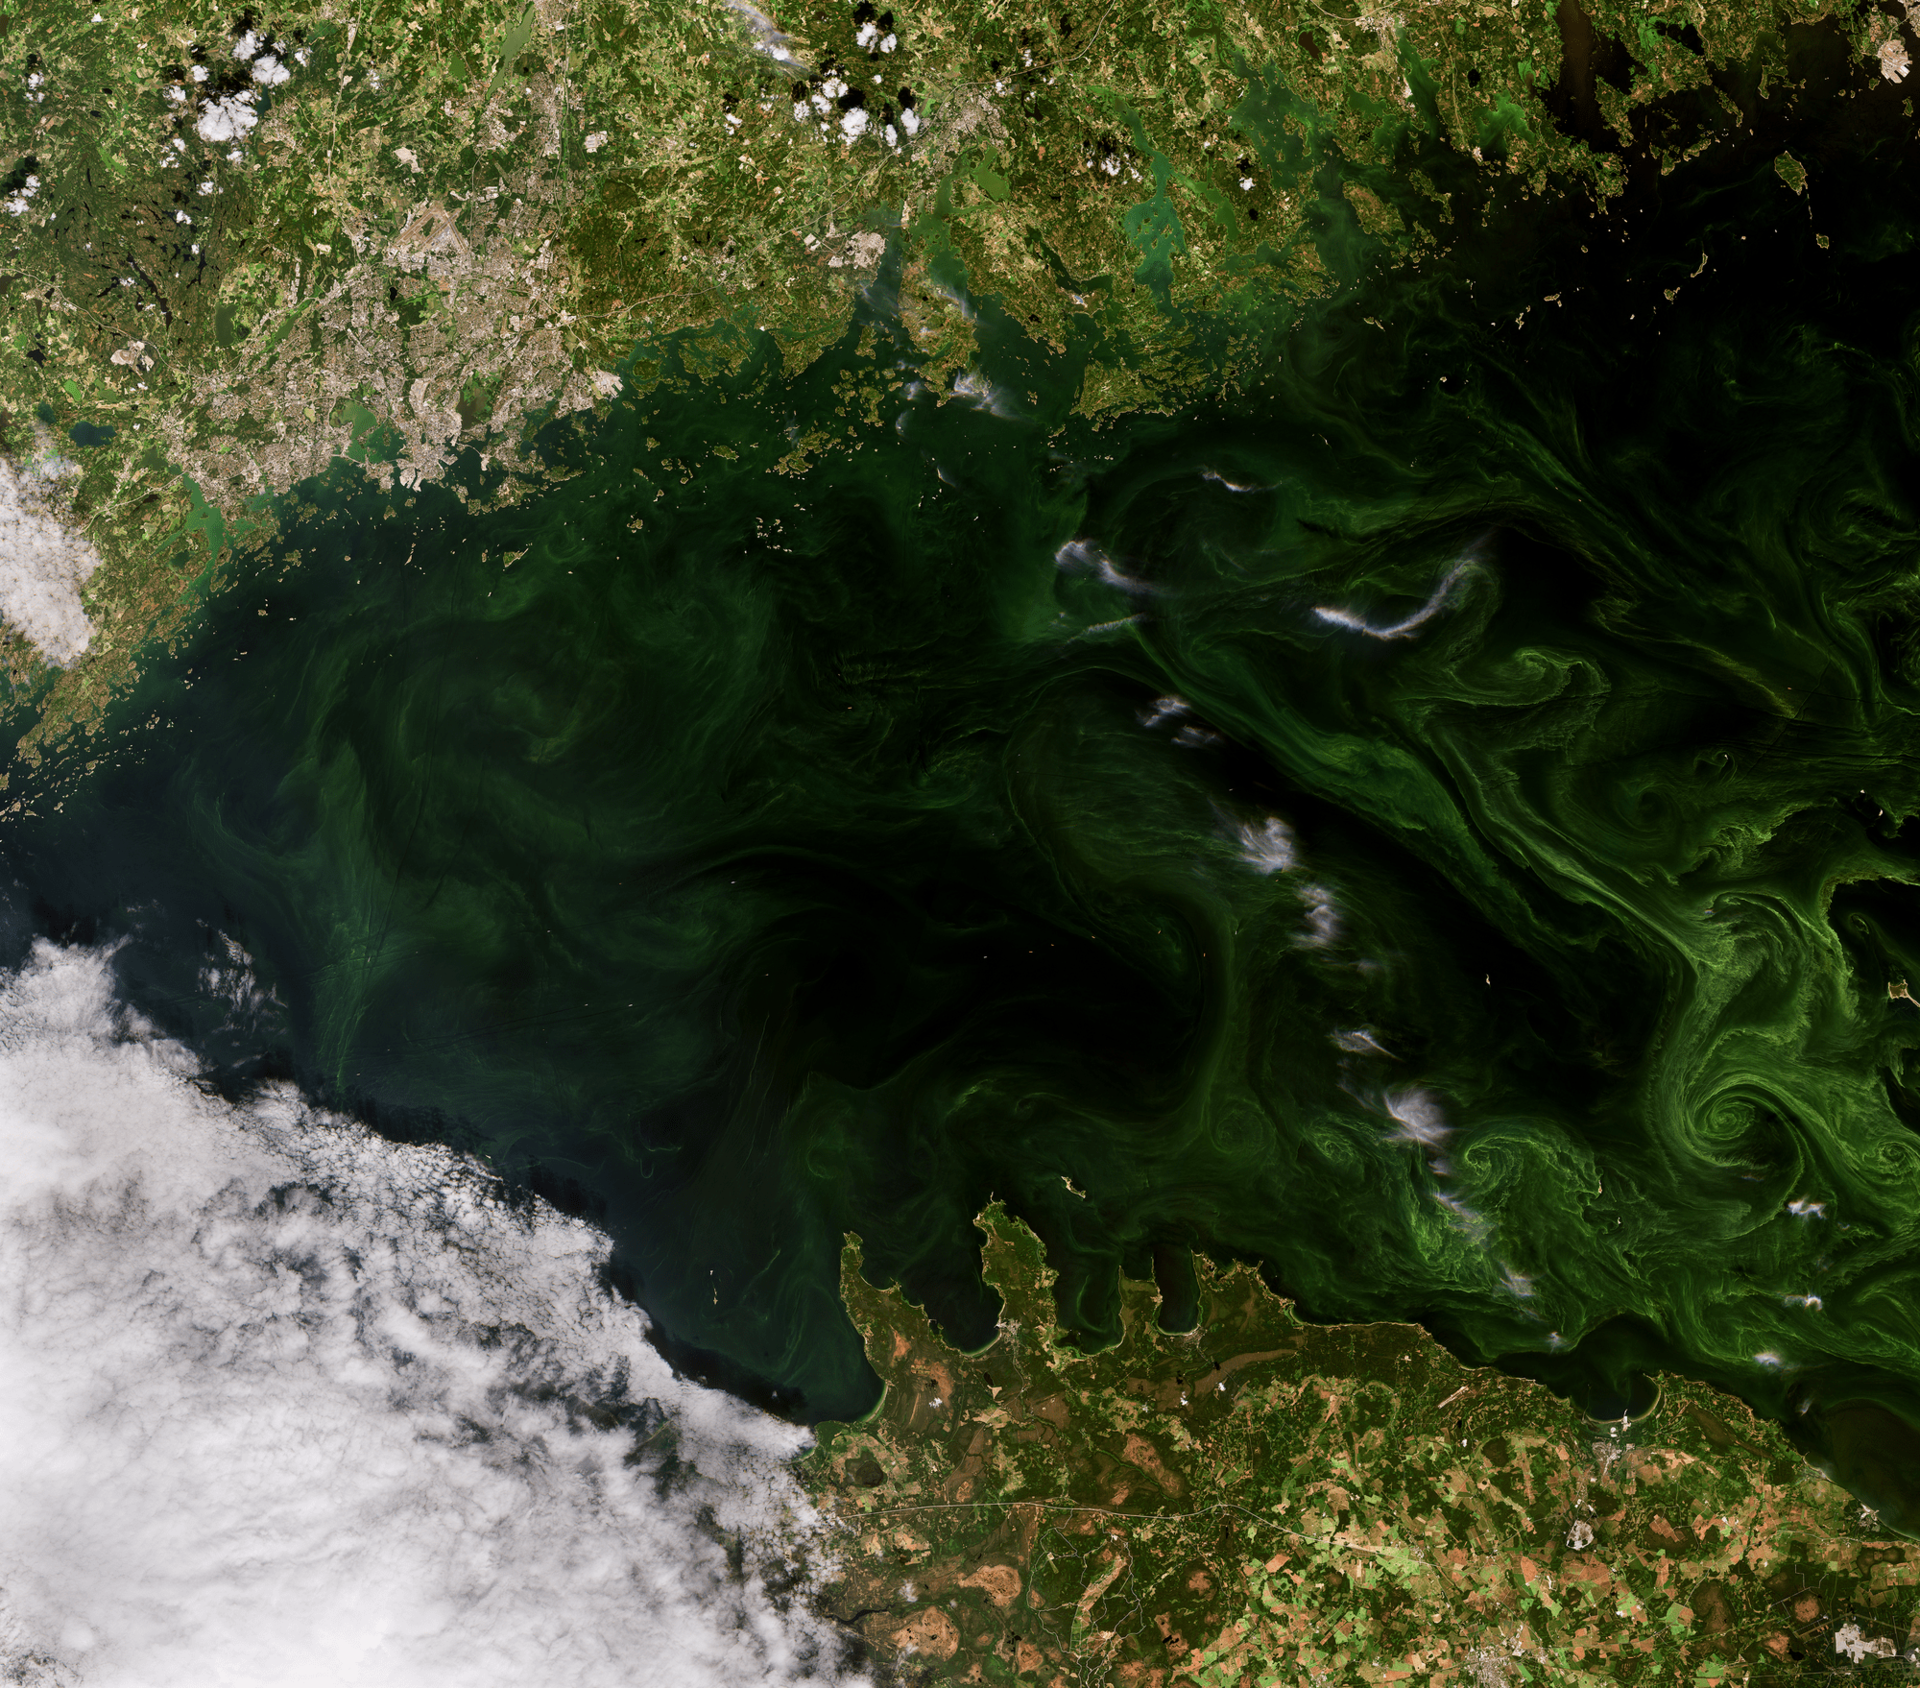 This Copernicus Sentinel-2 image features swirls of vivid, emerald green algal blooms in the Gulf of Finland.